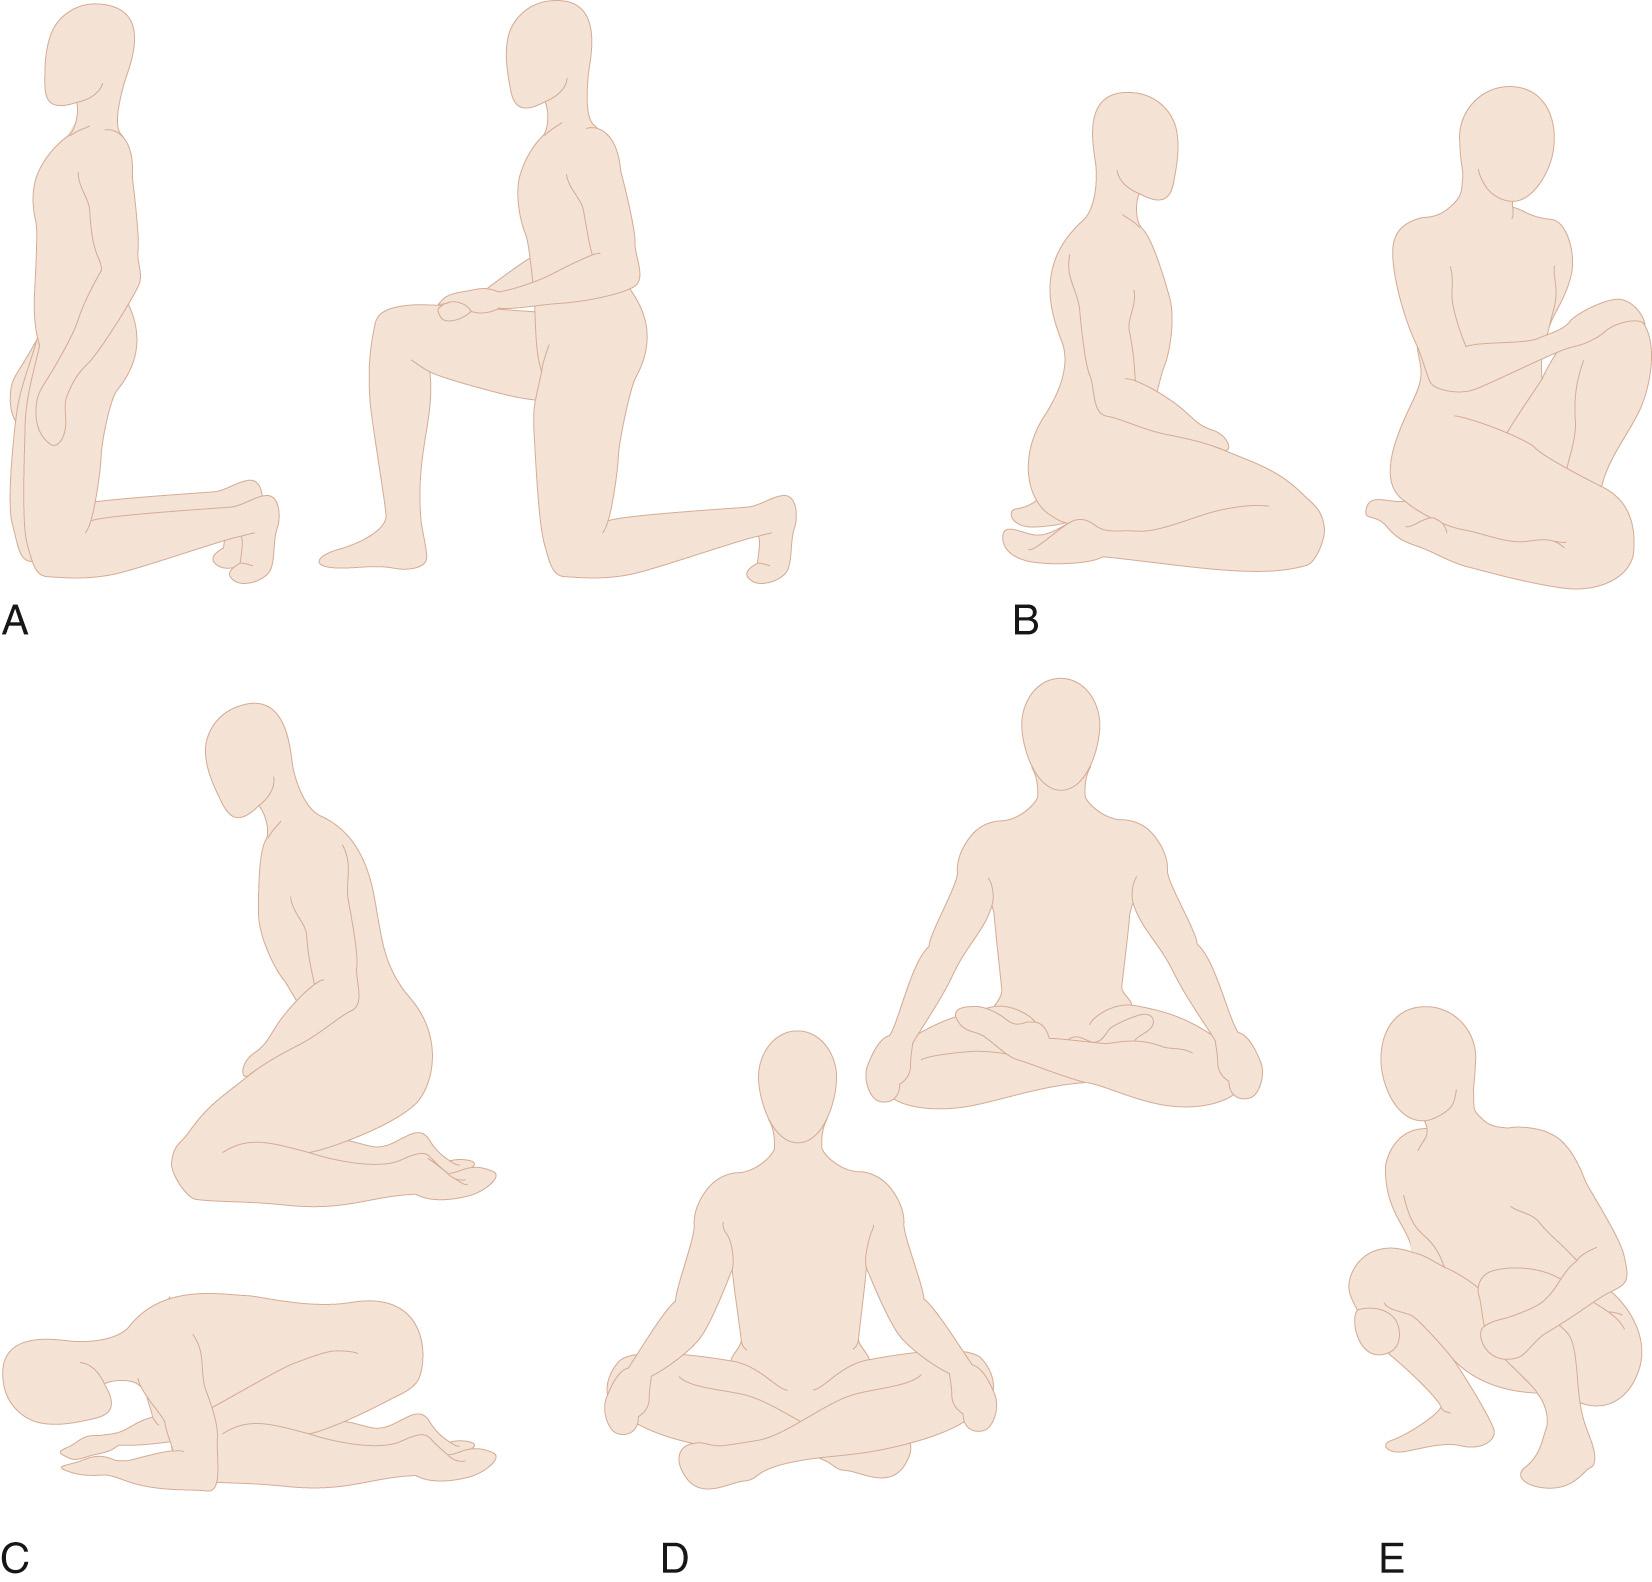 FIG 25.2, Different floor-based activities depicted—(A) kneeling (single leg and both legs), (B) seiza (single leg and both legs), (C) Namaz position, (D) cross-leg sitting (standard and lotus position), (E) squatting position. Illustrations by Kruttika Sequeira.